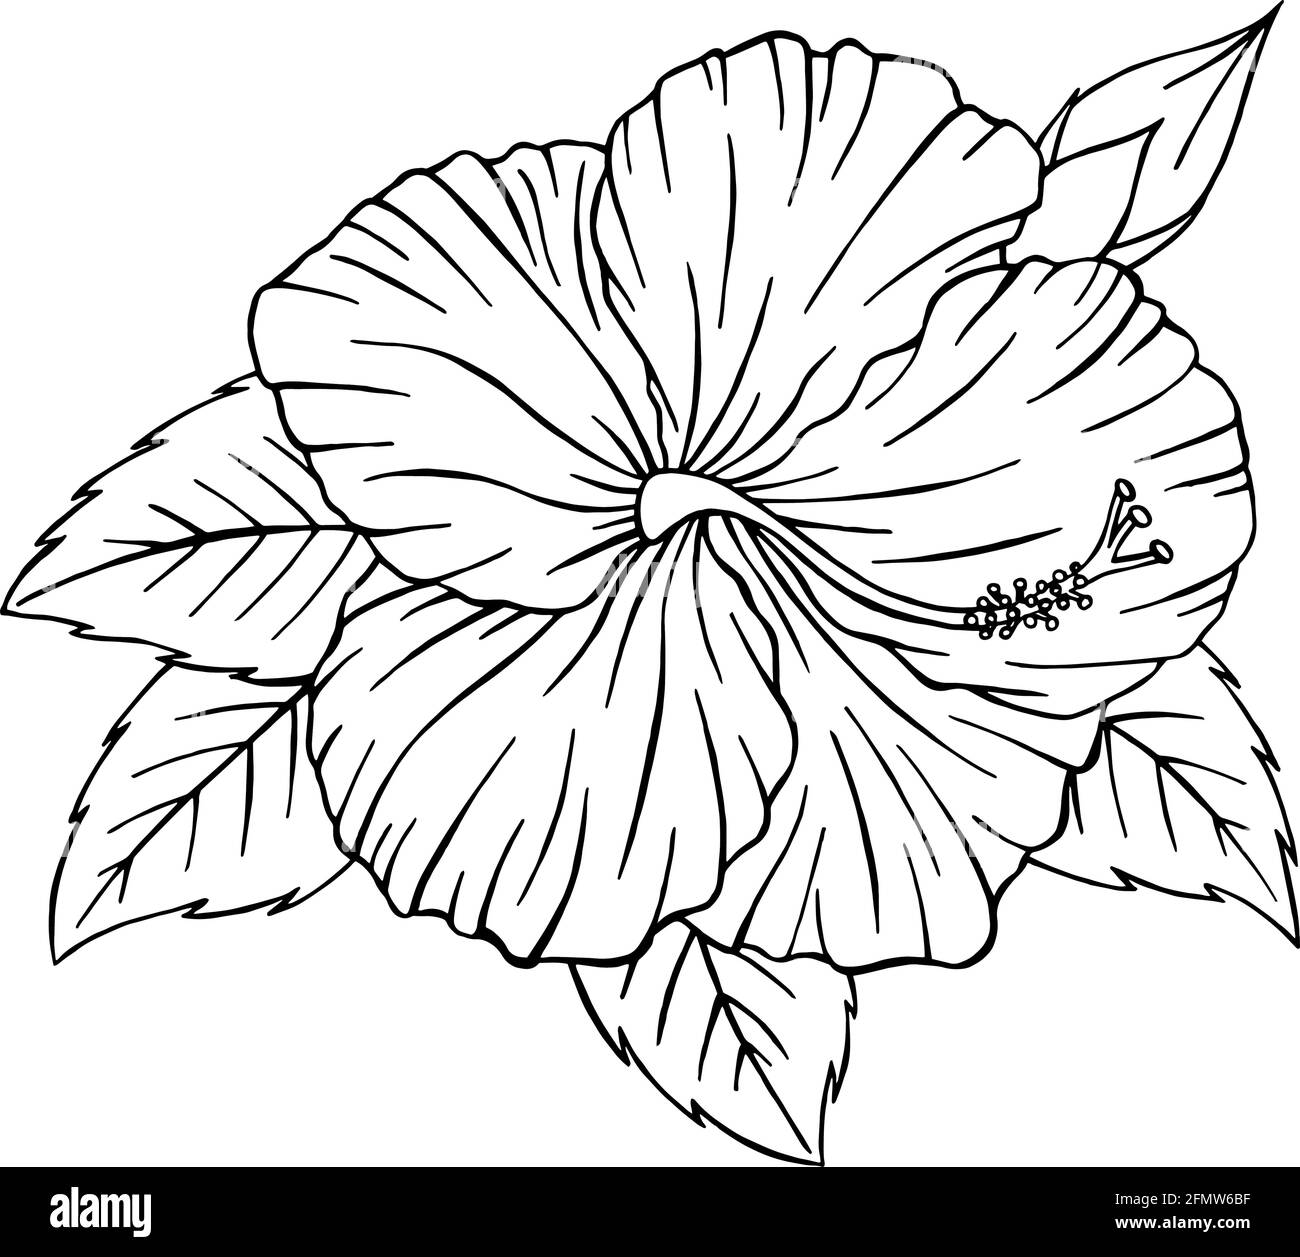 Hand Drawn Hibiscus flower outline. Hibiscus line art vector illustration isolated on white background. Tropical flower silhouette doodle Stock Vector